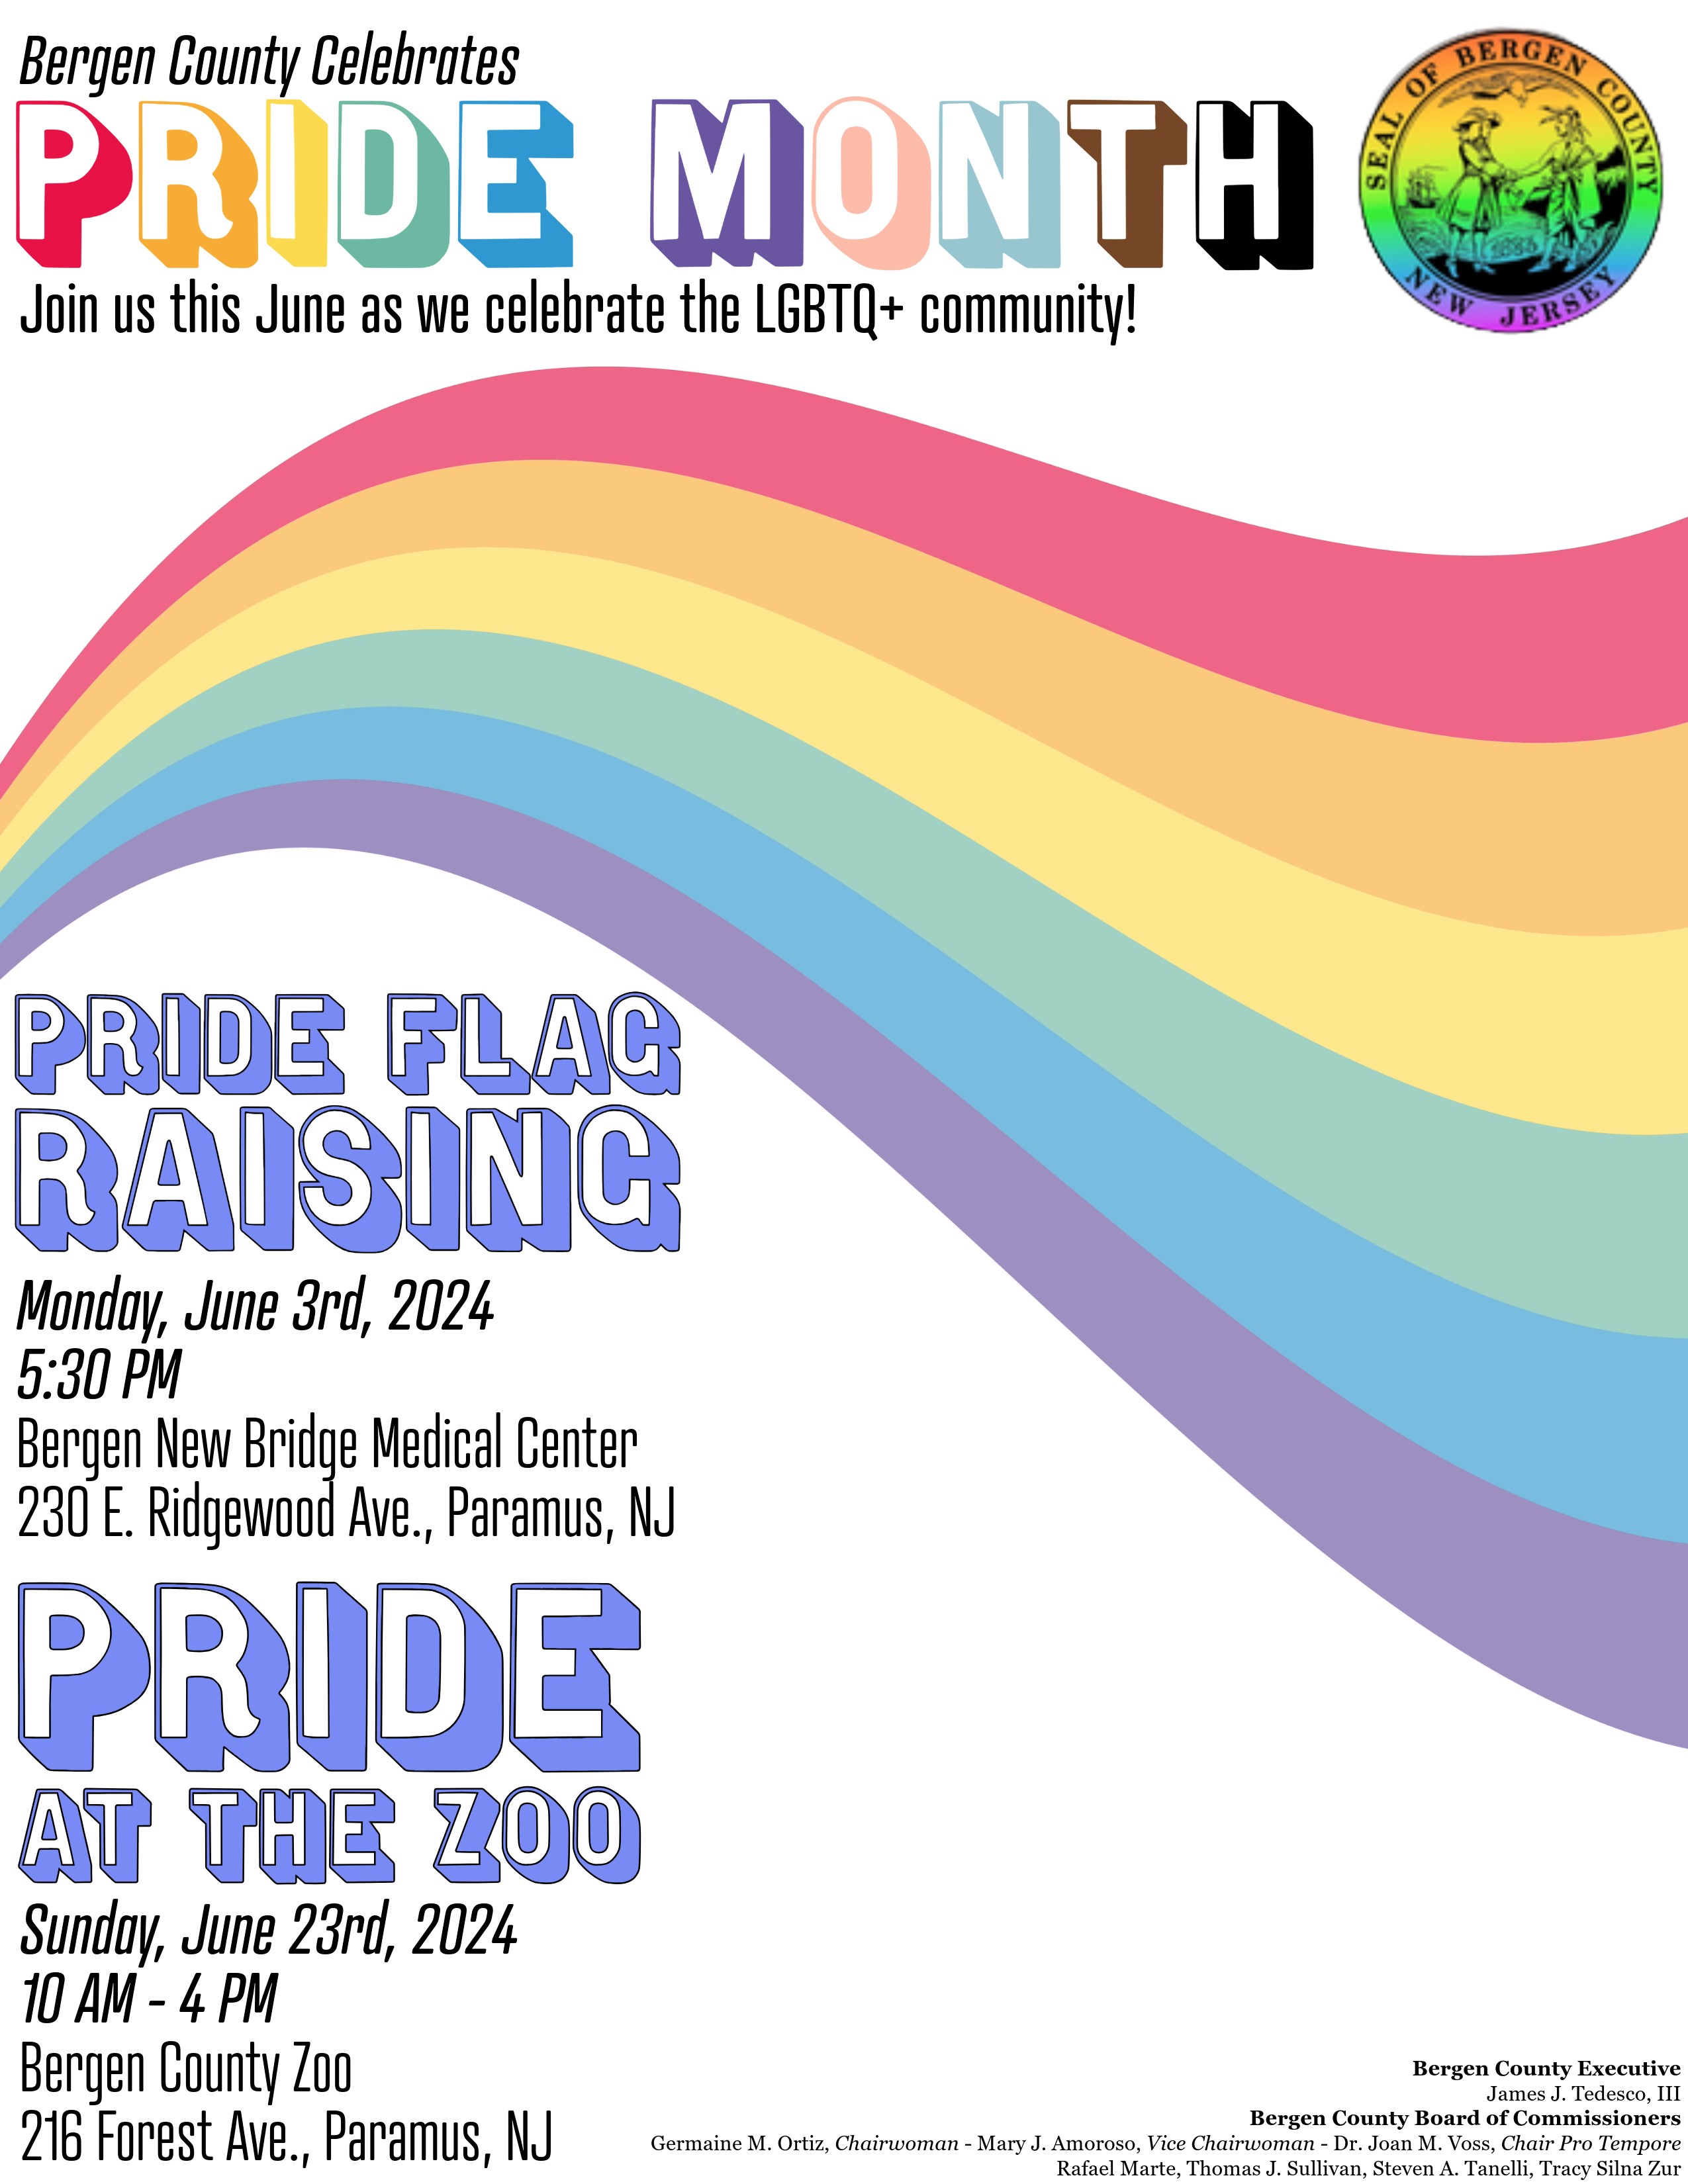 pride save the date